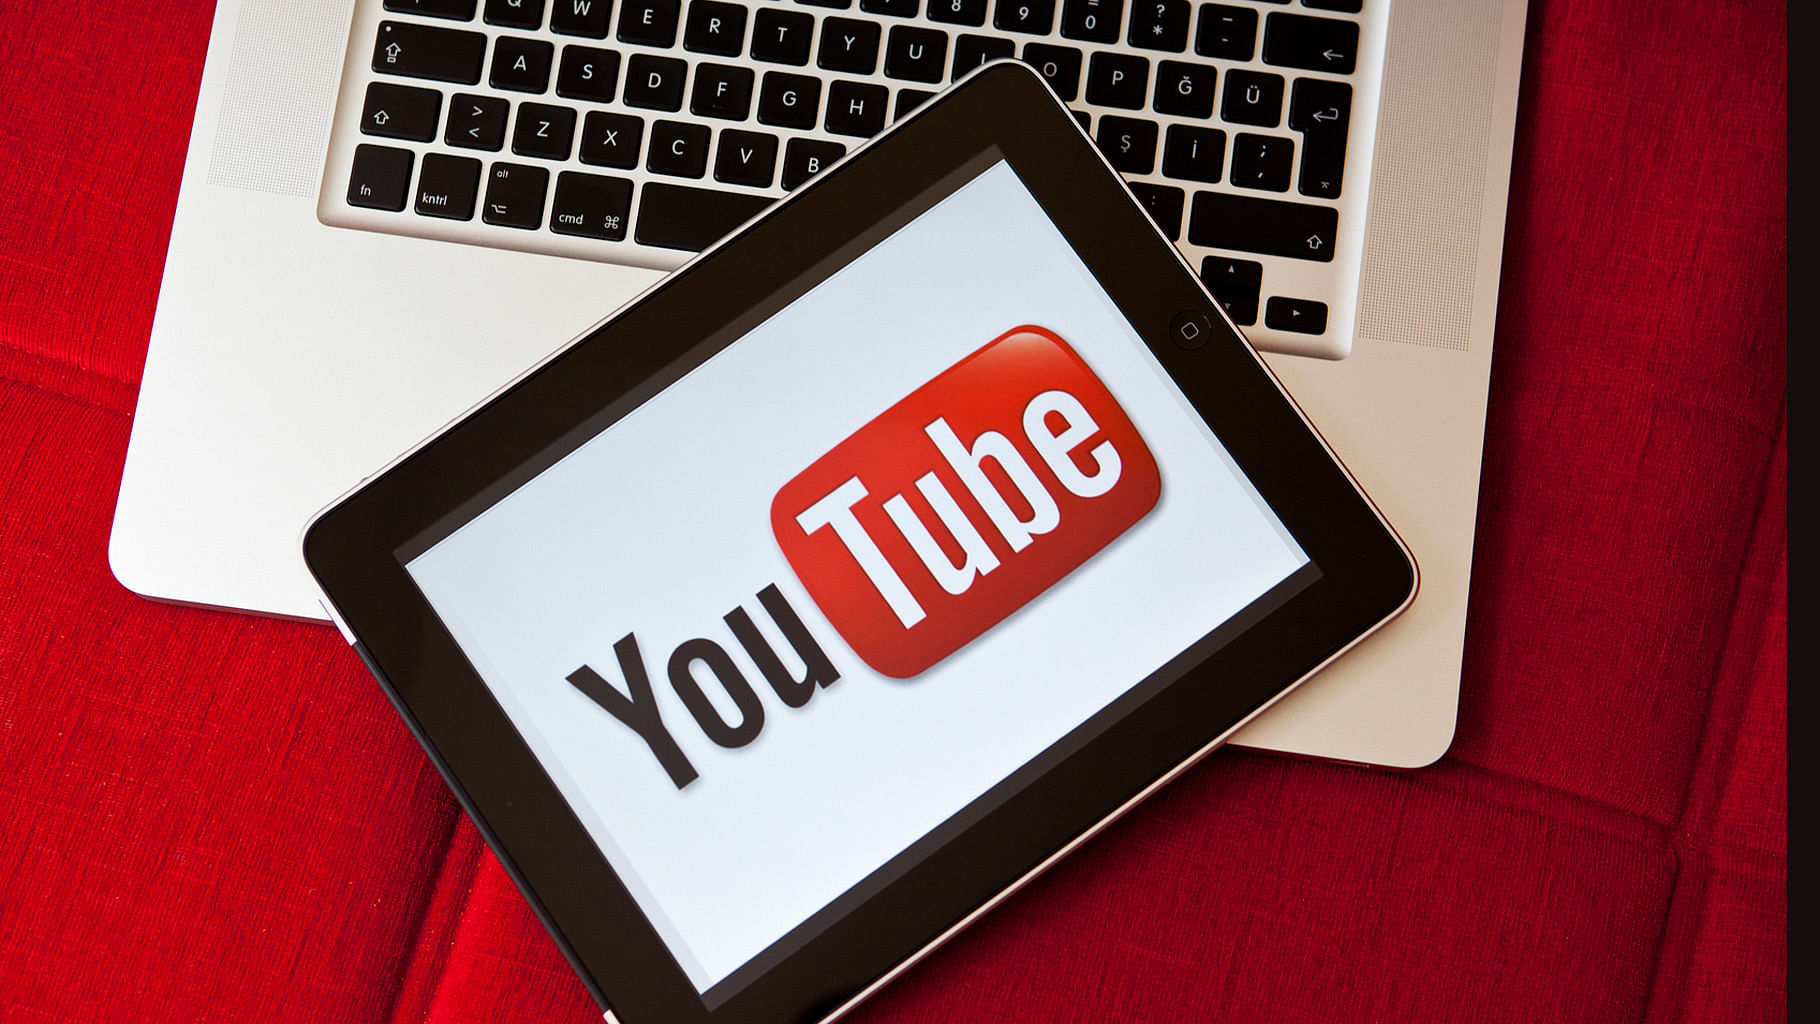 Tata Sky had objected to videos on how to crack the encryption of its set top boxes on YouTube. (Photo: iStockphoto) 